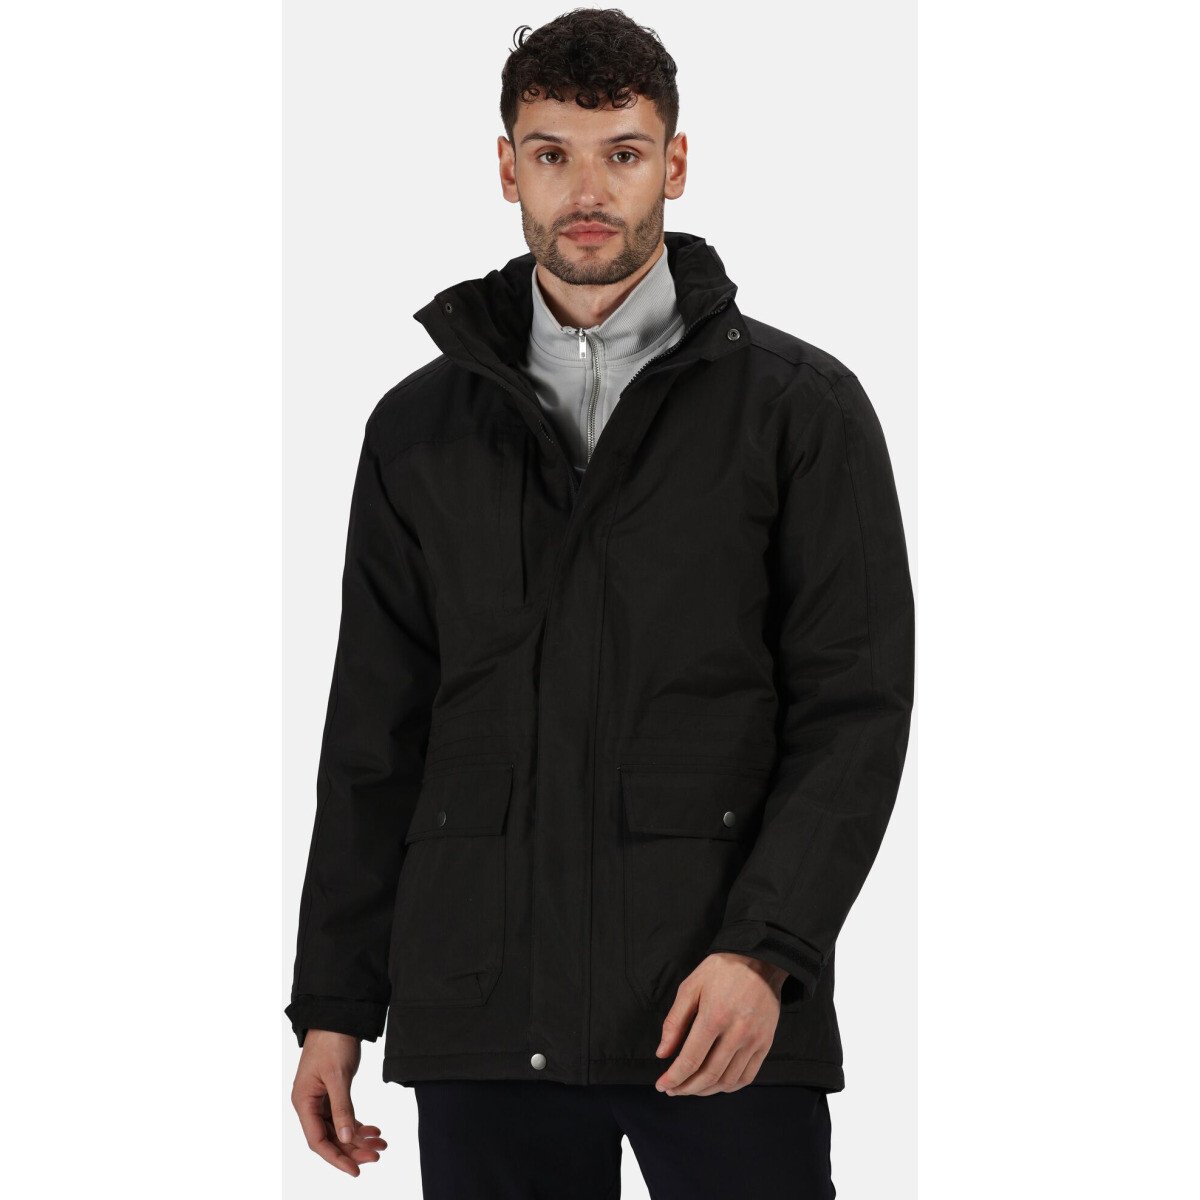 Regatta TRA203 Darby III 3 Insulated Parka Jacket from Lawson HIS